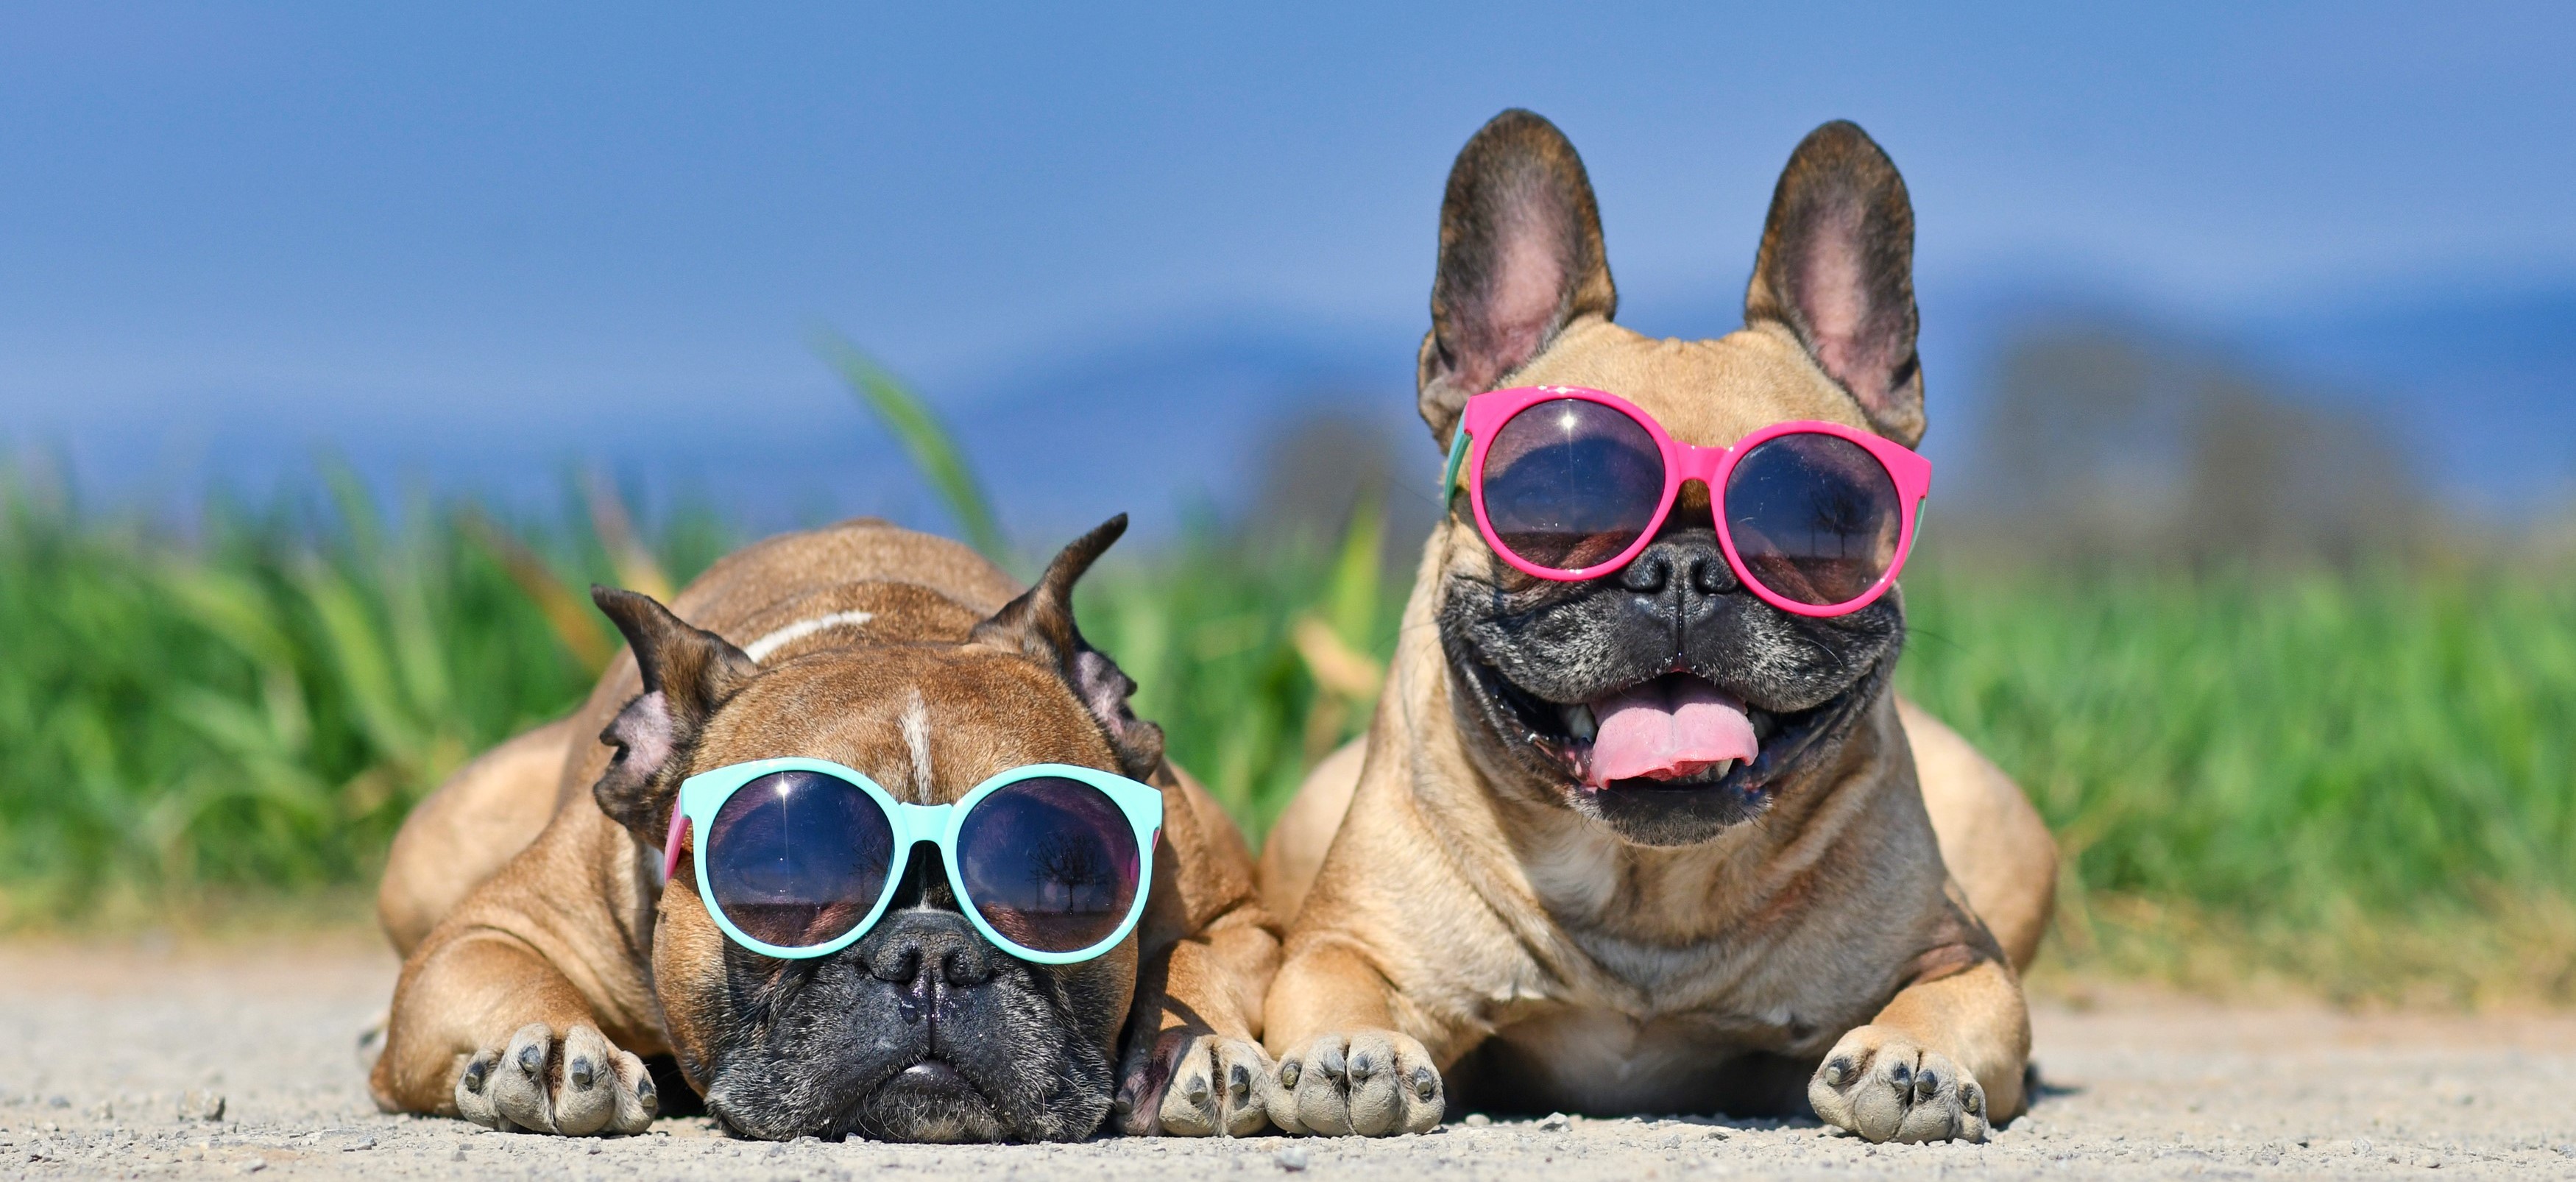 Dogs with sunglasses in the sun